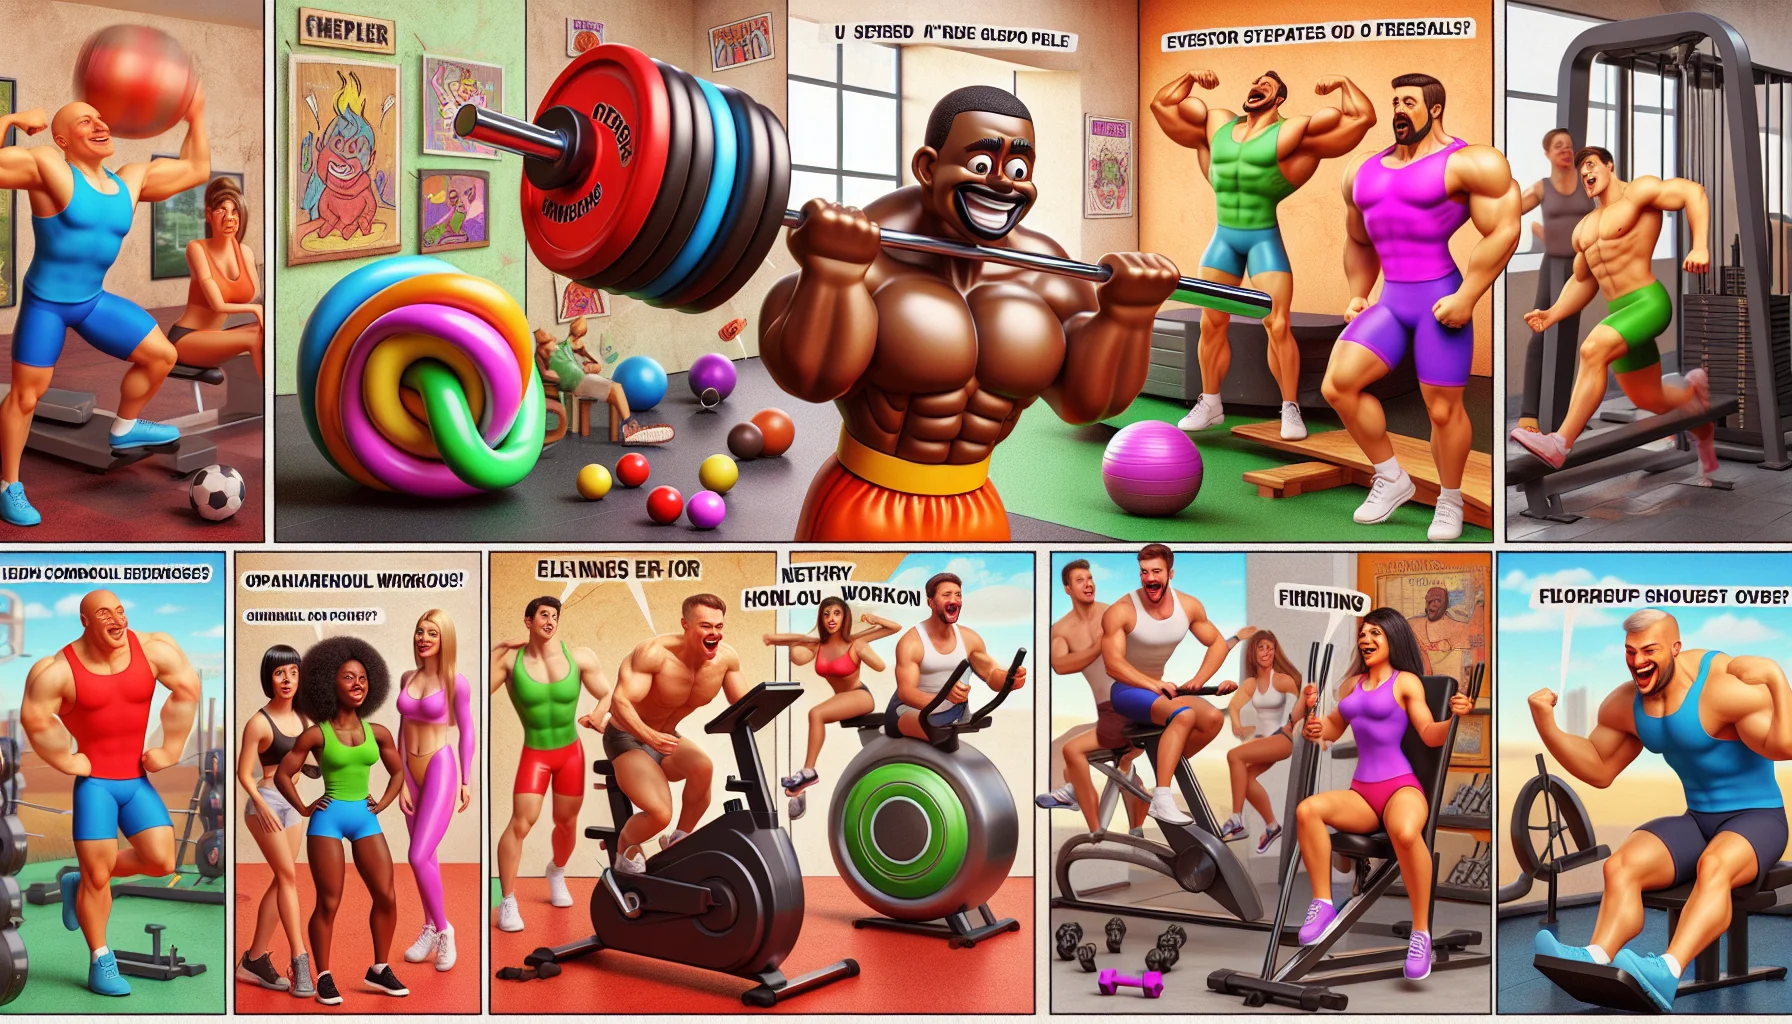 A humorous setting in a local gym with a focus on body sculpting. Imagine a colourful view of various exercise machines and free weights. Amongst them, an animated barbell, with a face drawn on it appears to be straining hard as it 'lifts' human-shaped weights with exaggerated muscles. Nearby, an exercise bike is depicted as having wheels that are spinning so fast they have ignited a tiny harmless flame, implying an extreme cardio workout. Different types of people are seen laughing and enjoying the humorous elements while engaging in their workouts. Represent people of varied genders and descents, such as a Black woman and a Hispanic man, nebulously contributing to the lively scene.